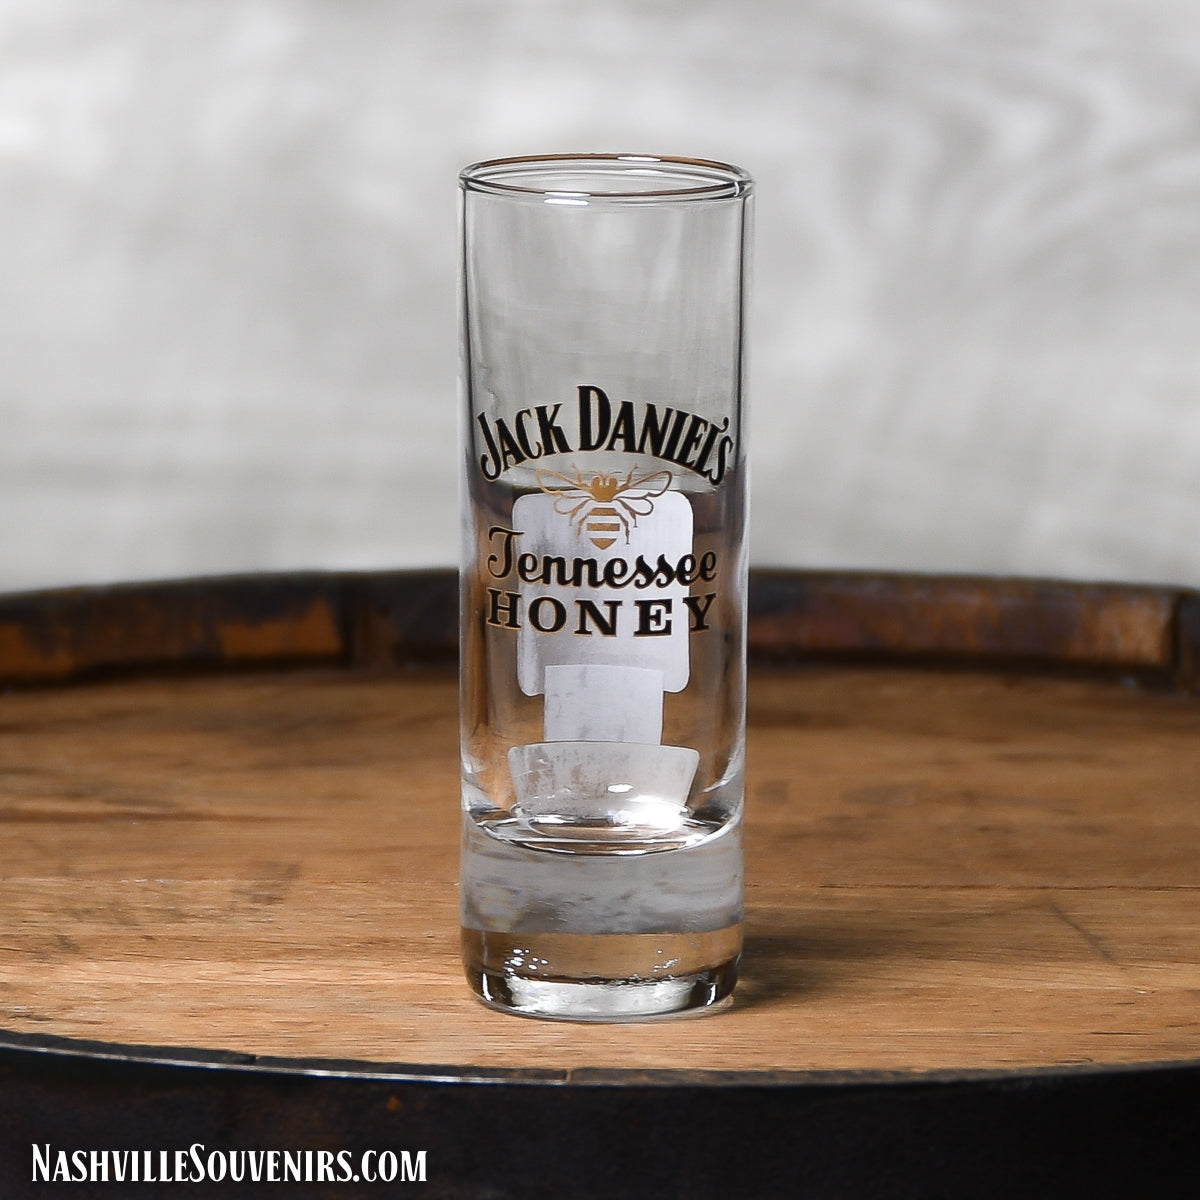 Officially licensed Jack Daniels Tennessee Honey Shooter. FREE SHIPPING on all US orders over $75!